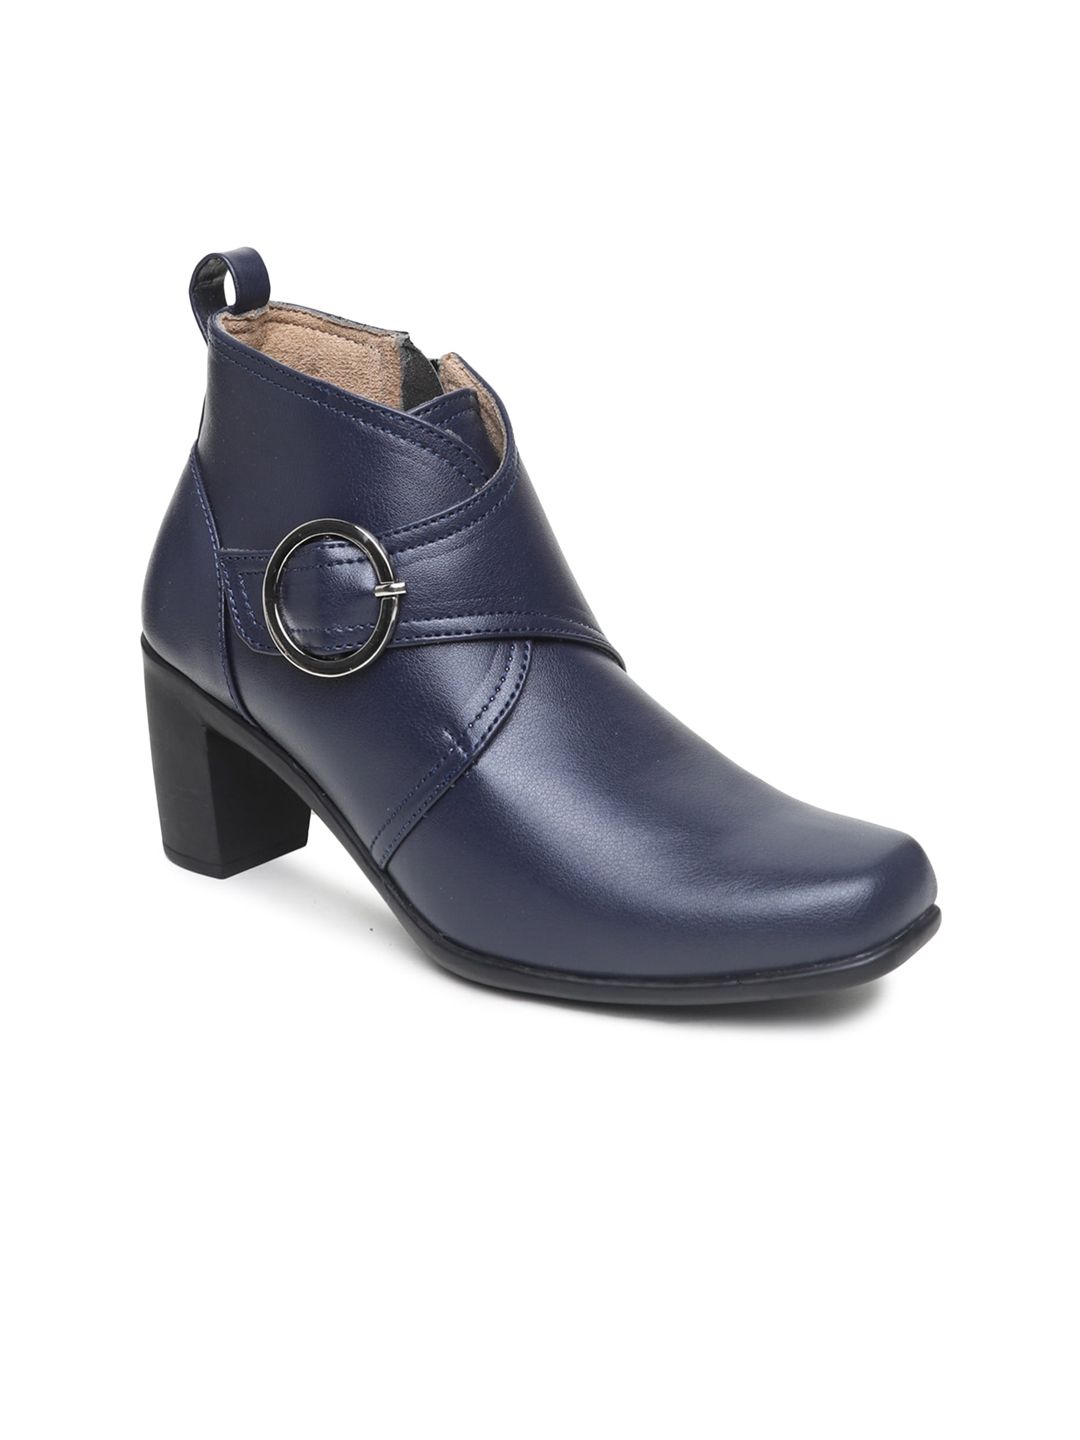 VALIOSAA Woman Navy Blue Block Heeled Boots with Buckles Price in India